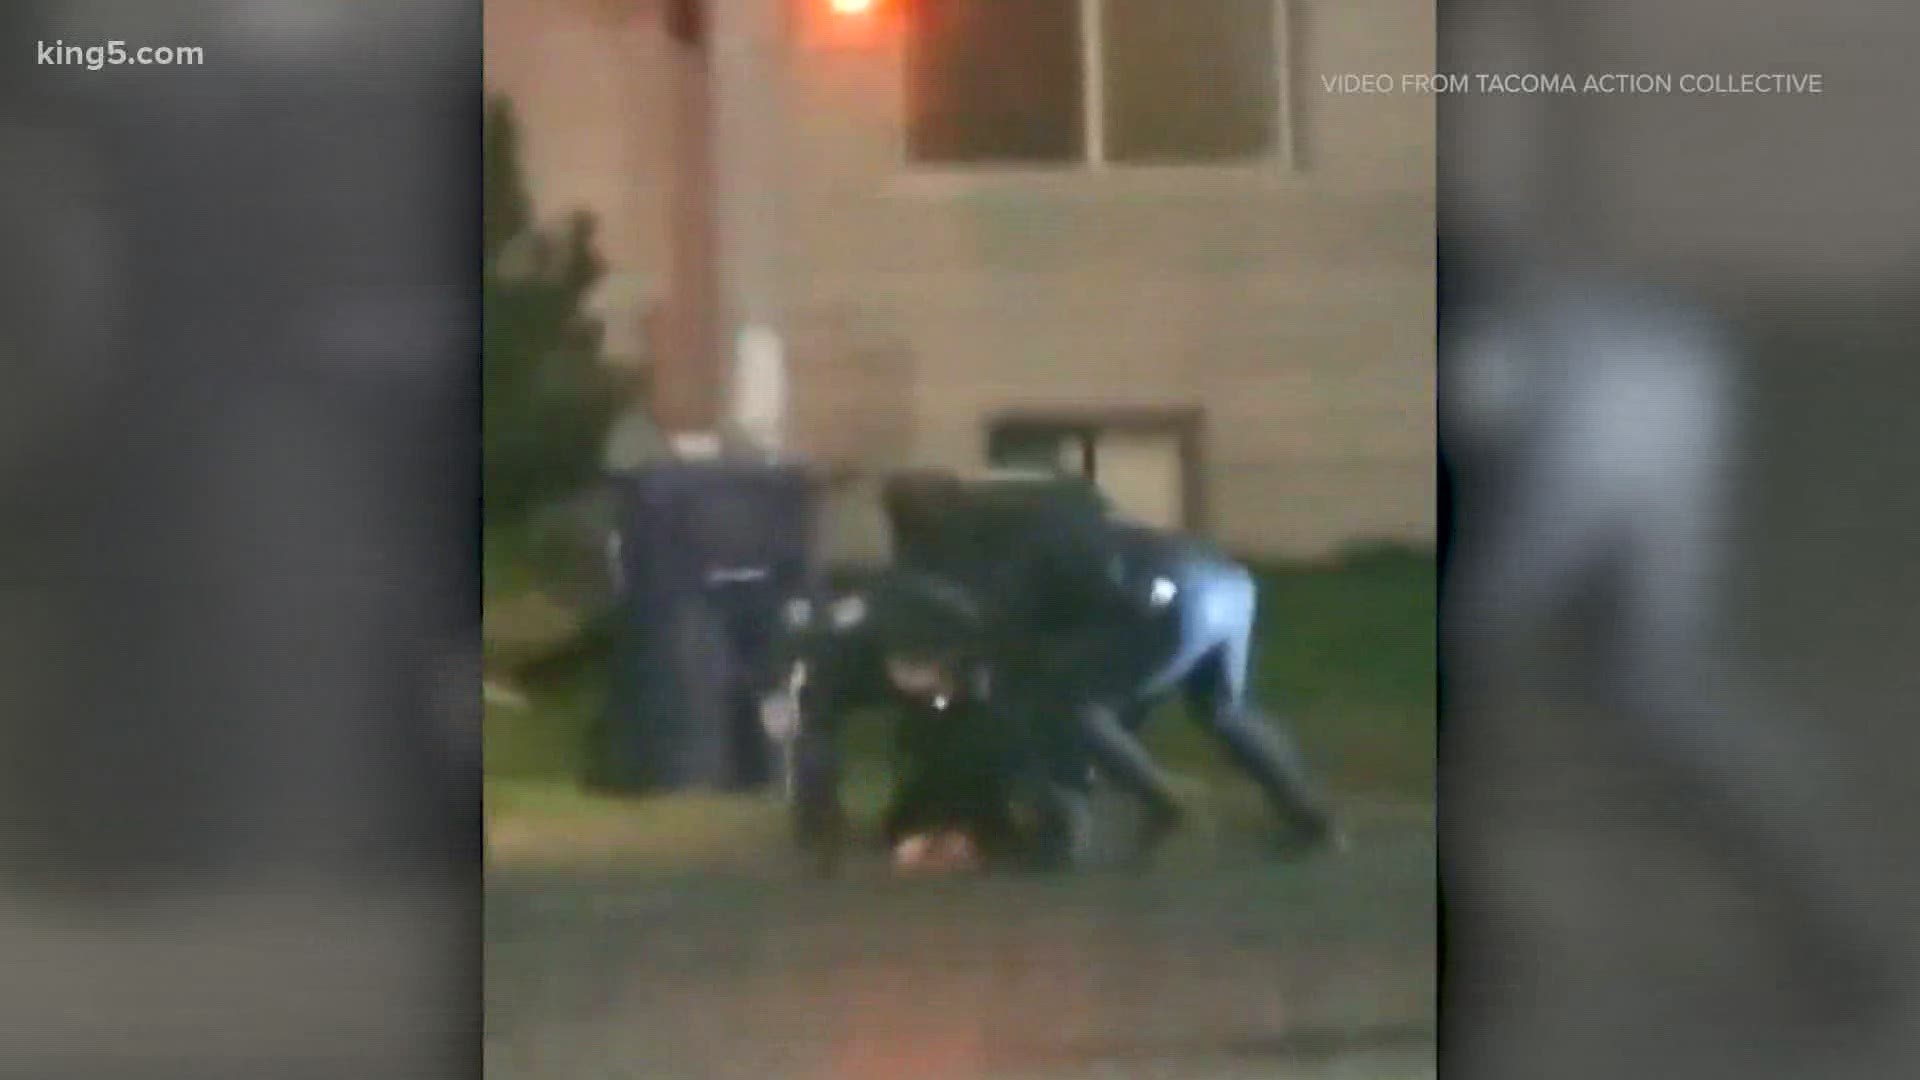 A new video shows a Tacoma police officer placing Manuel Ellis in a brief chokehold, despite a statement from the officers' attorneys denying that Ellis was choked.